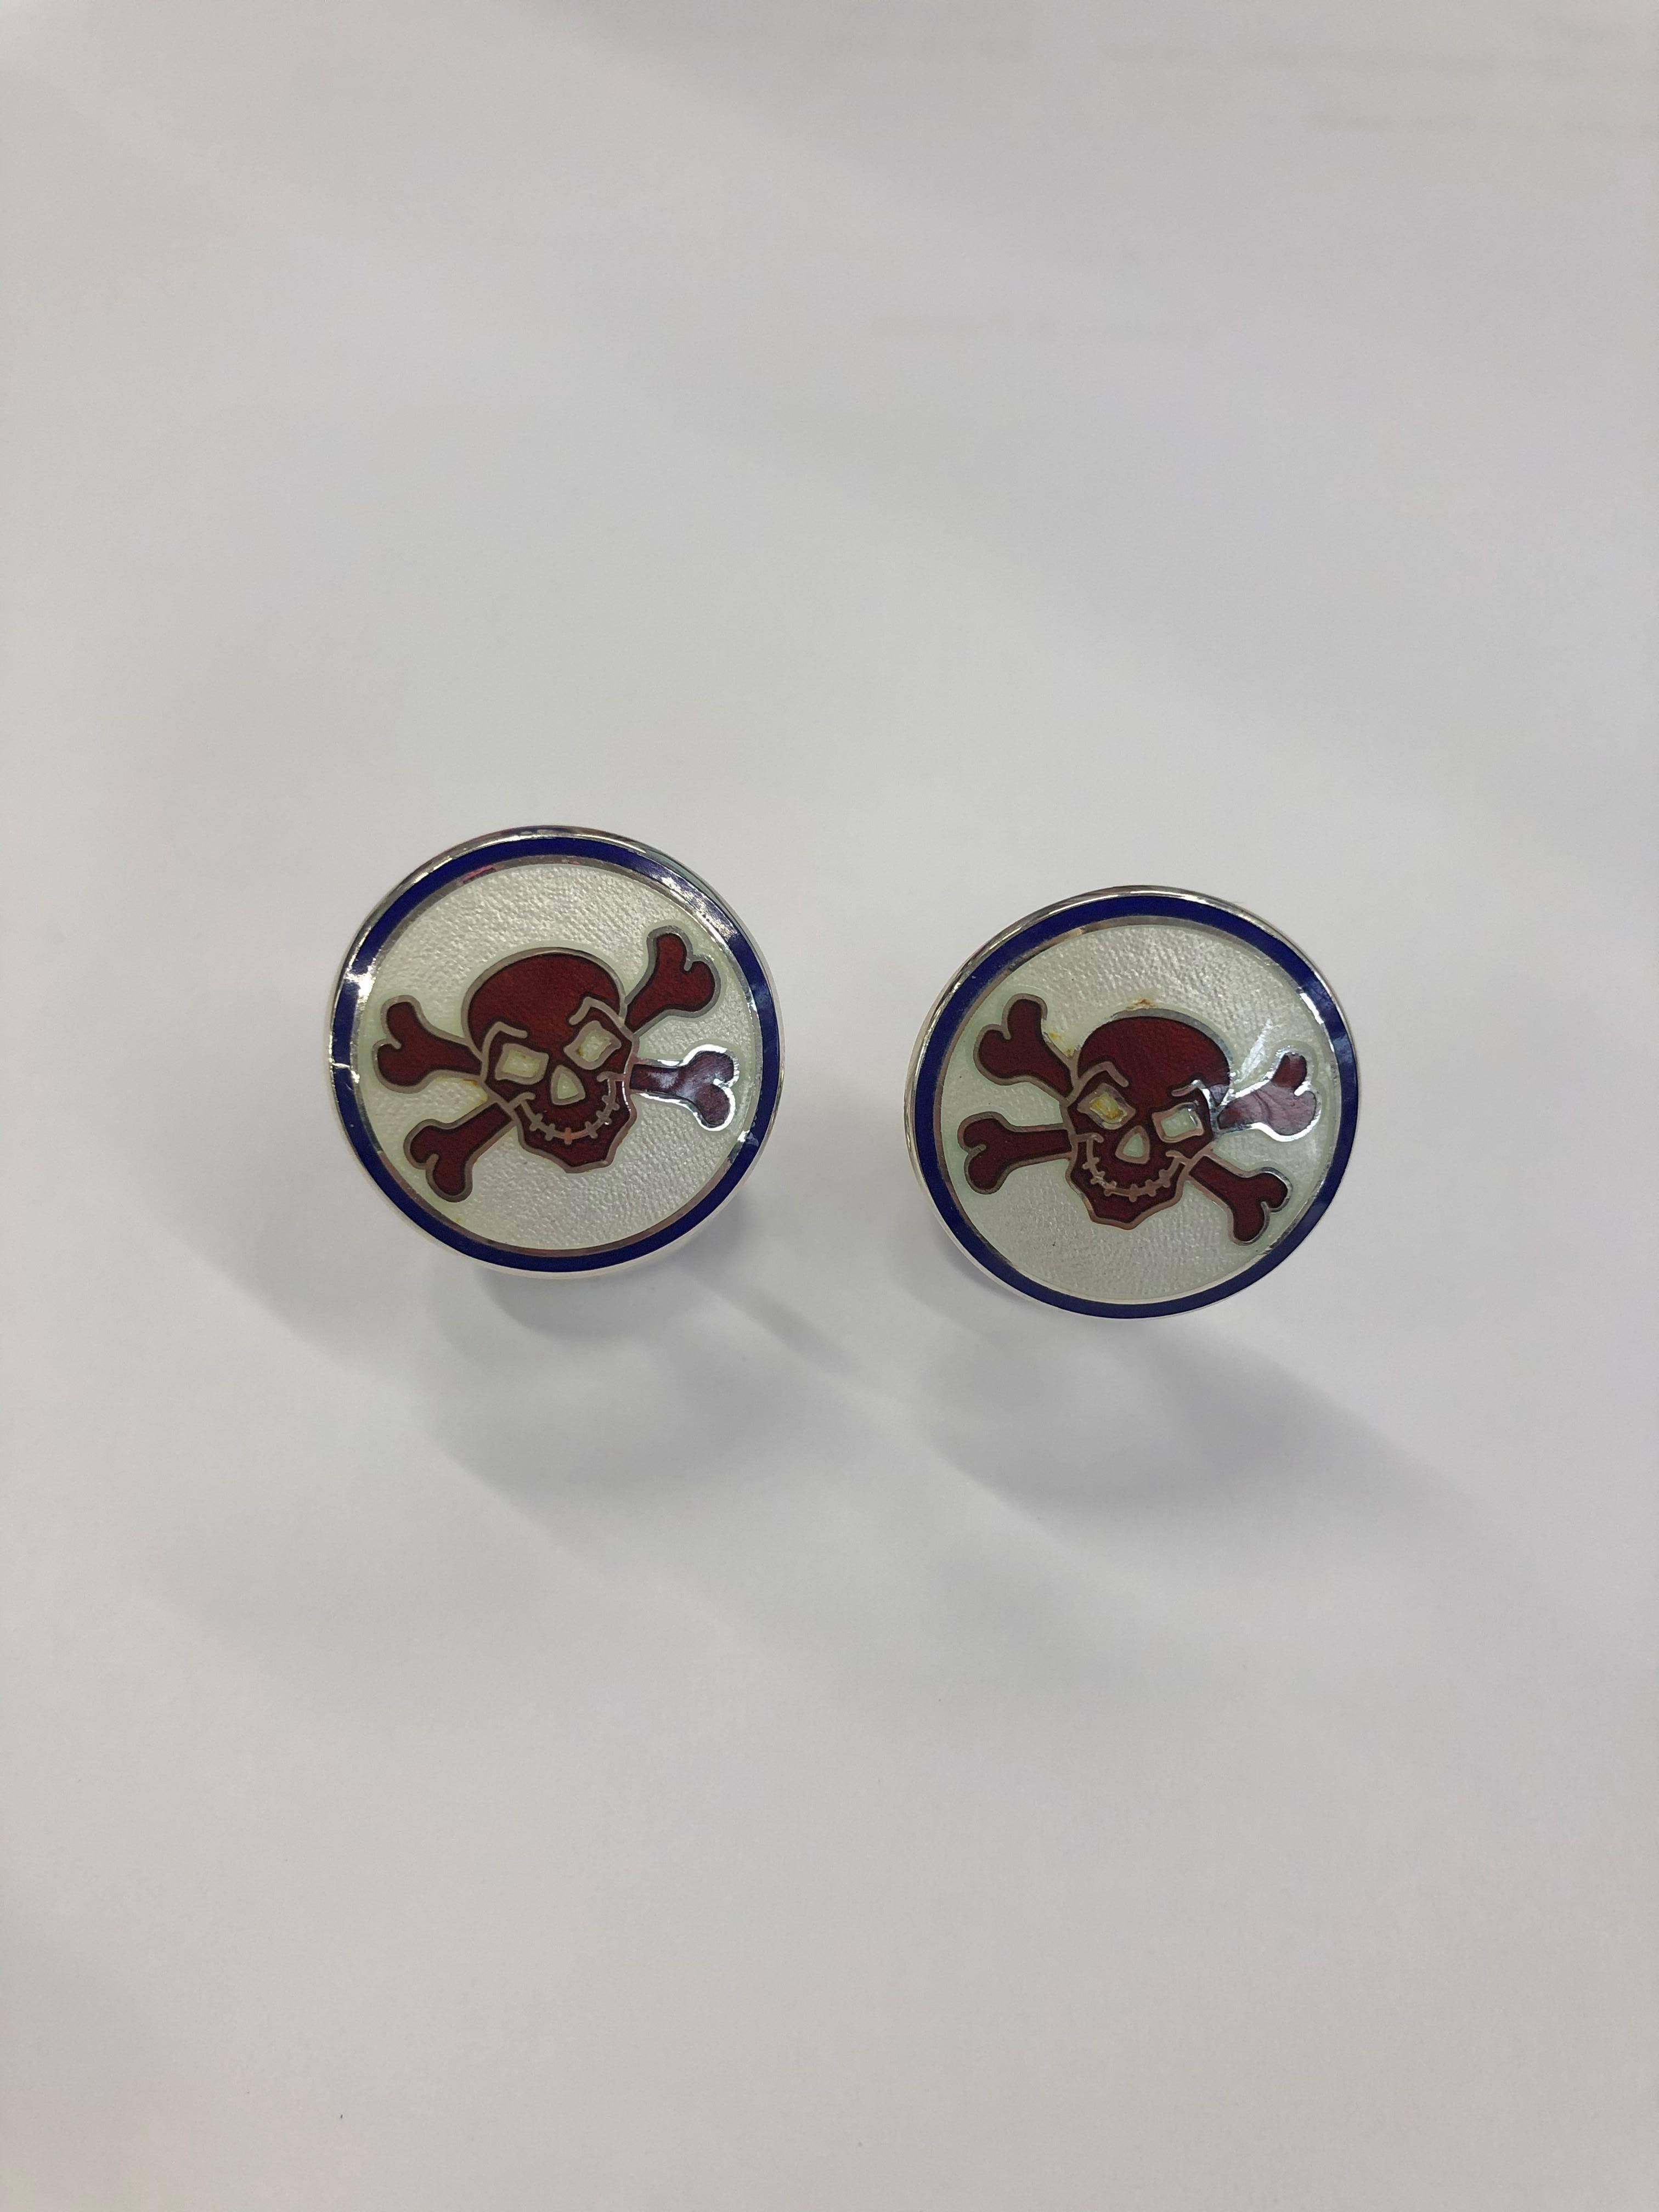 DEAKIN & FRANCIS, Piccadilly Arcade, London

Ahoy Me Hearties! These sterling silver cufflinks have been delicately hand-enamelled in red, white and blue. Skulls are a Deakin & Francis trademark, and these cufflinks sit well in the collection. With